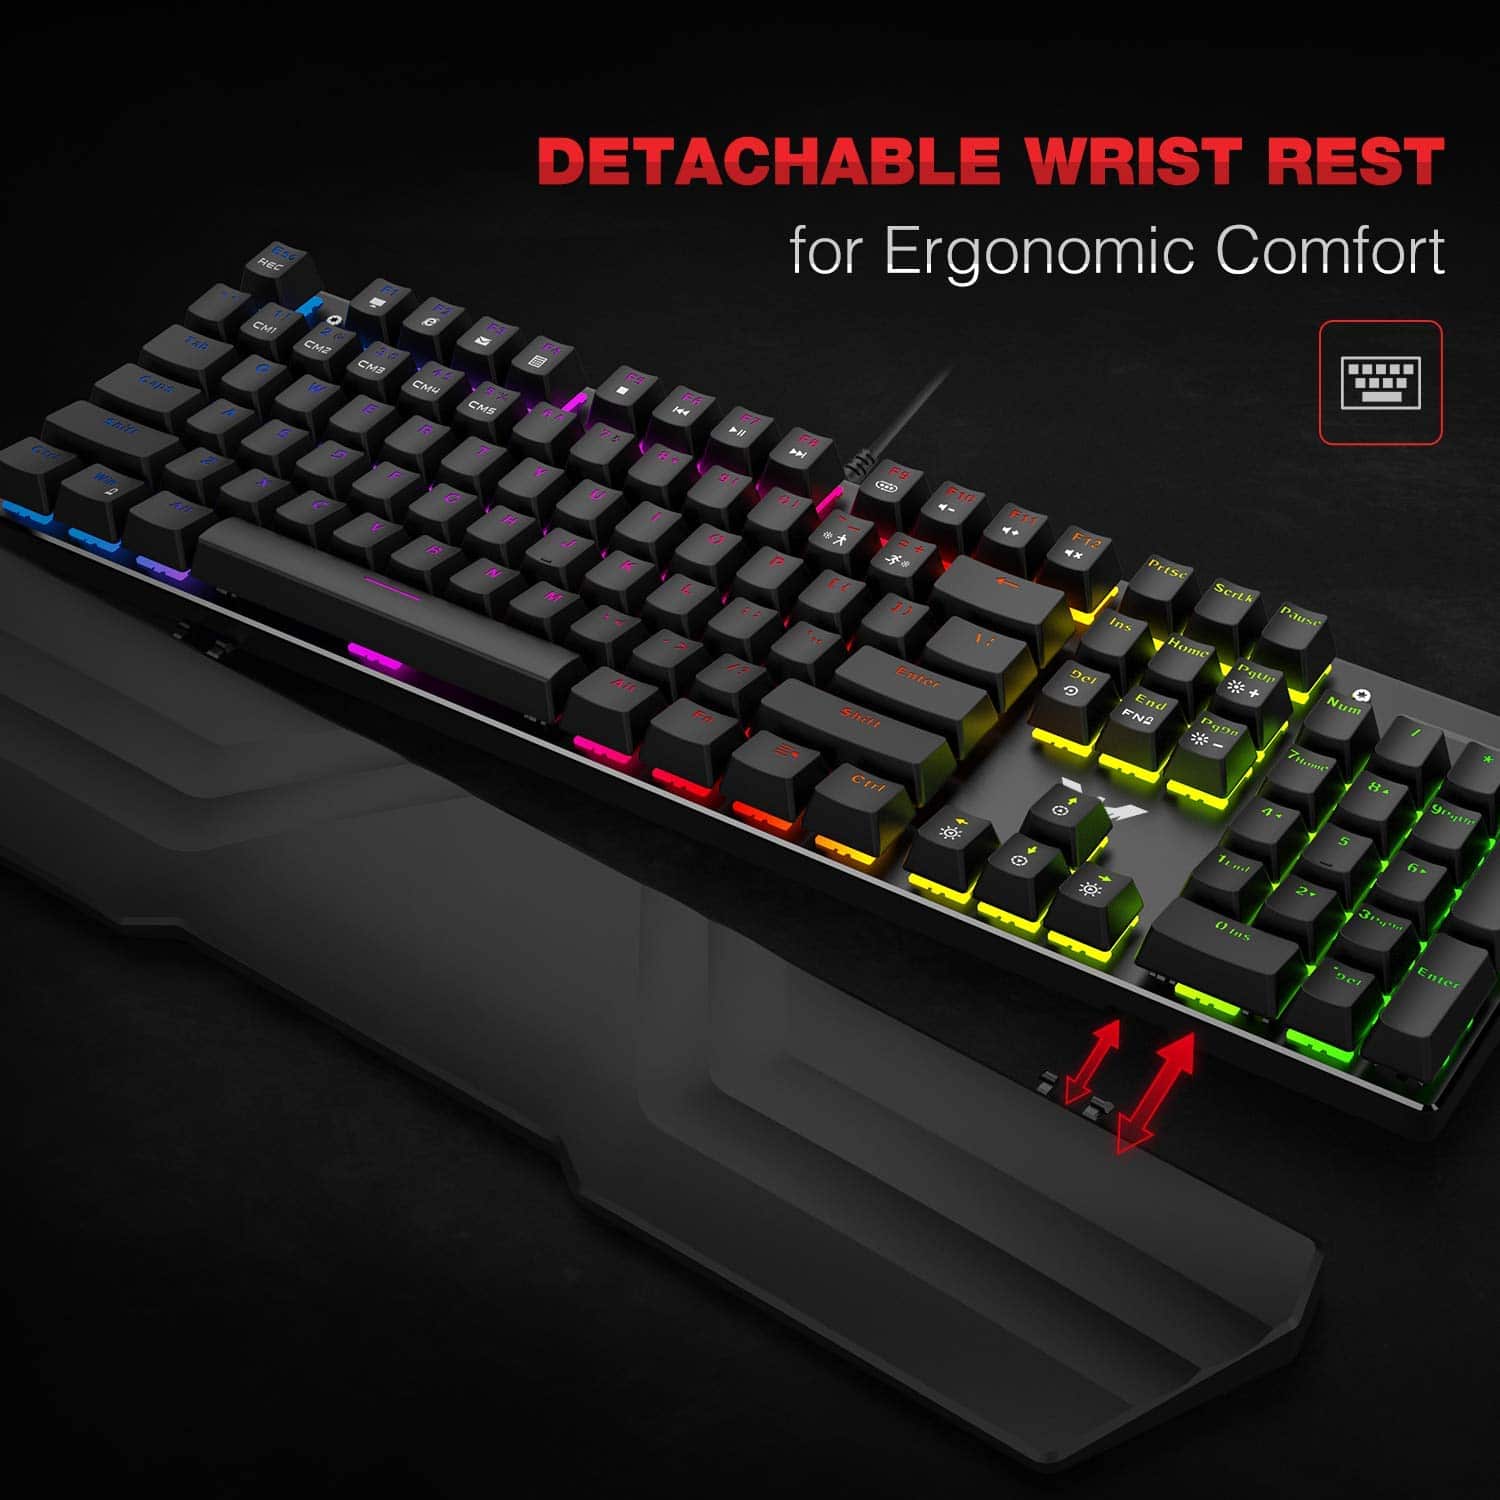 HAVIT KB389L Mechanical Keyboard and Mouse Combo 104 Keys with Detachable Wrist Rest